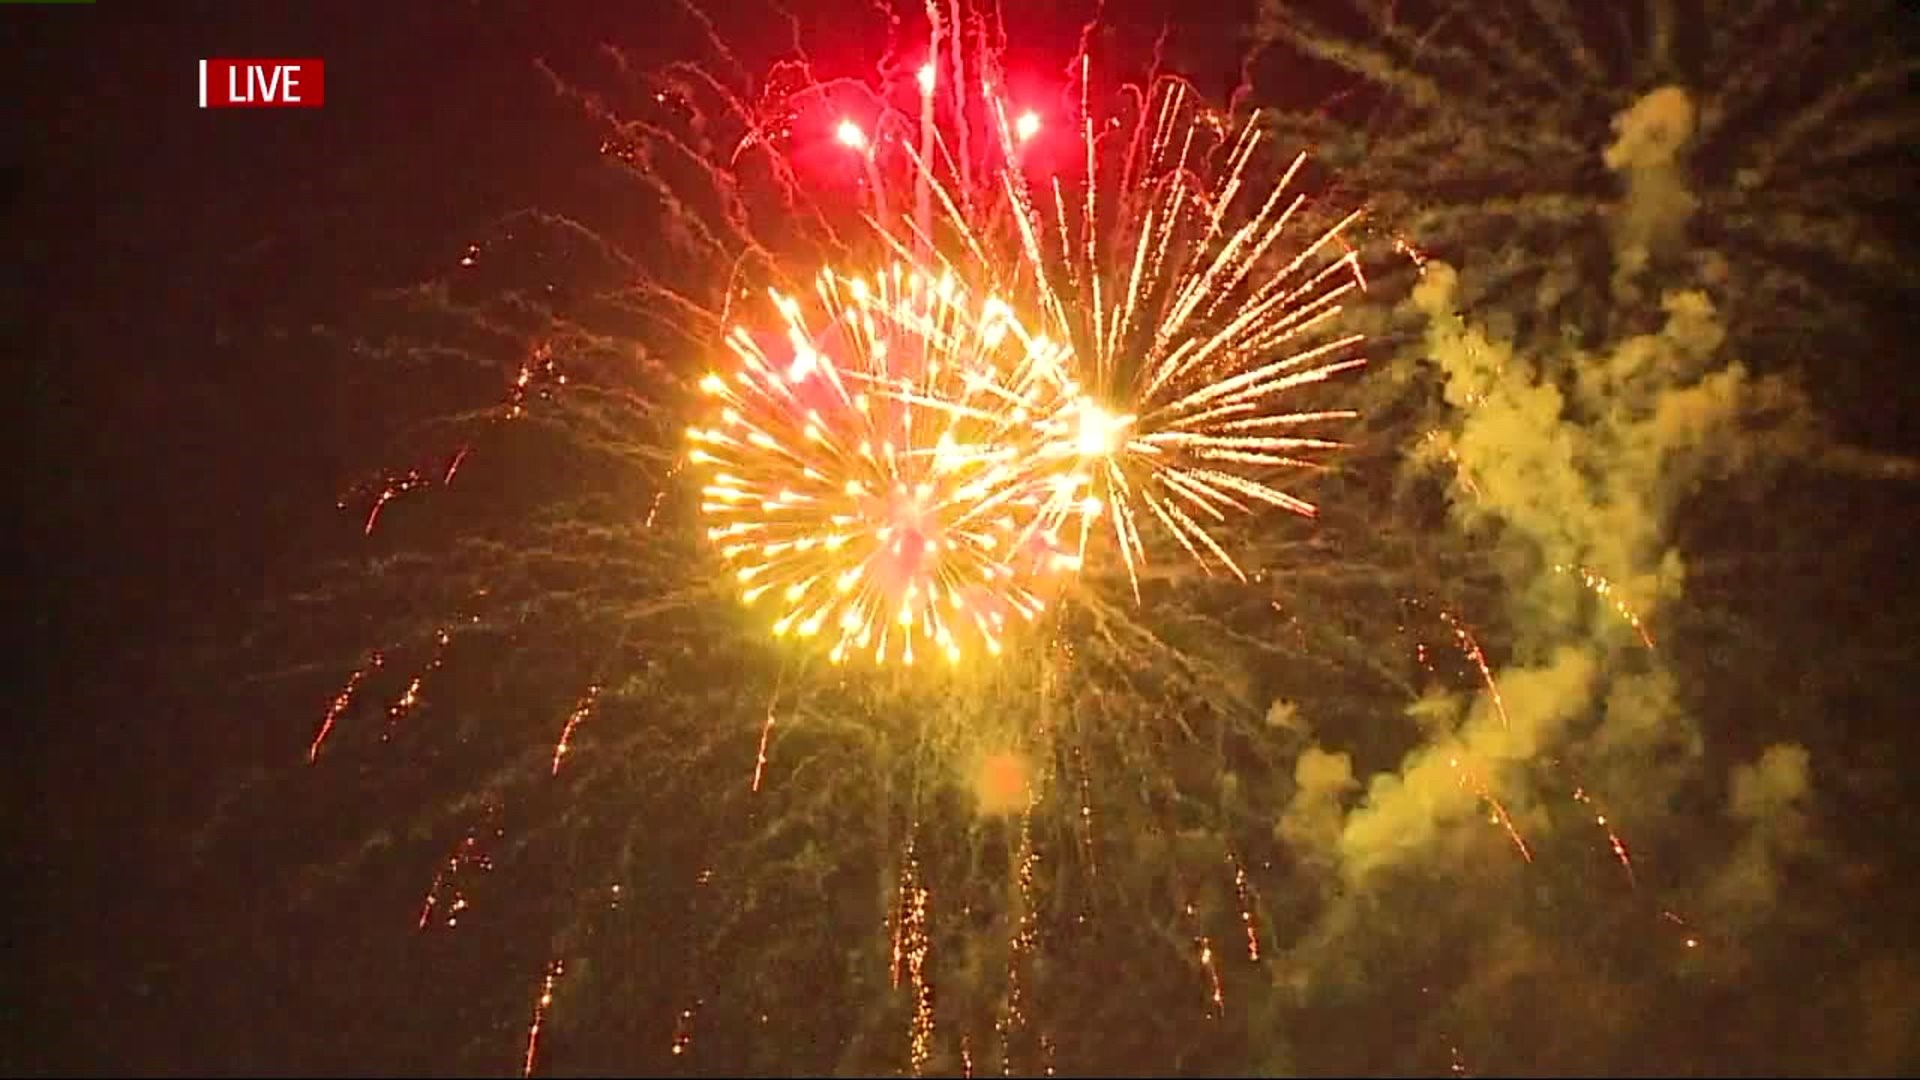 Did you miss the Long’s Park fireworks? Watch the whole display here